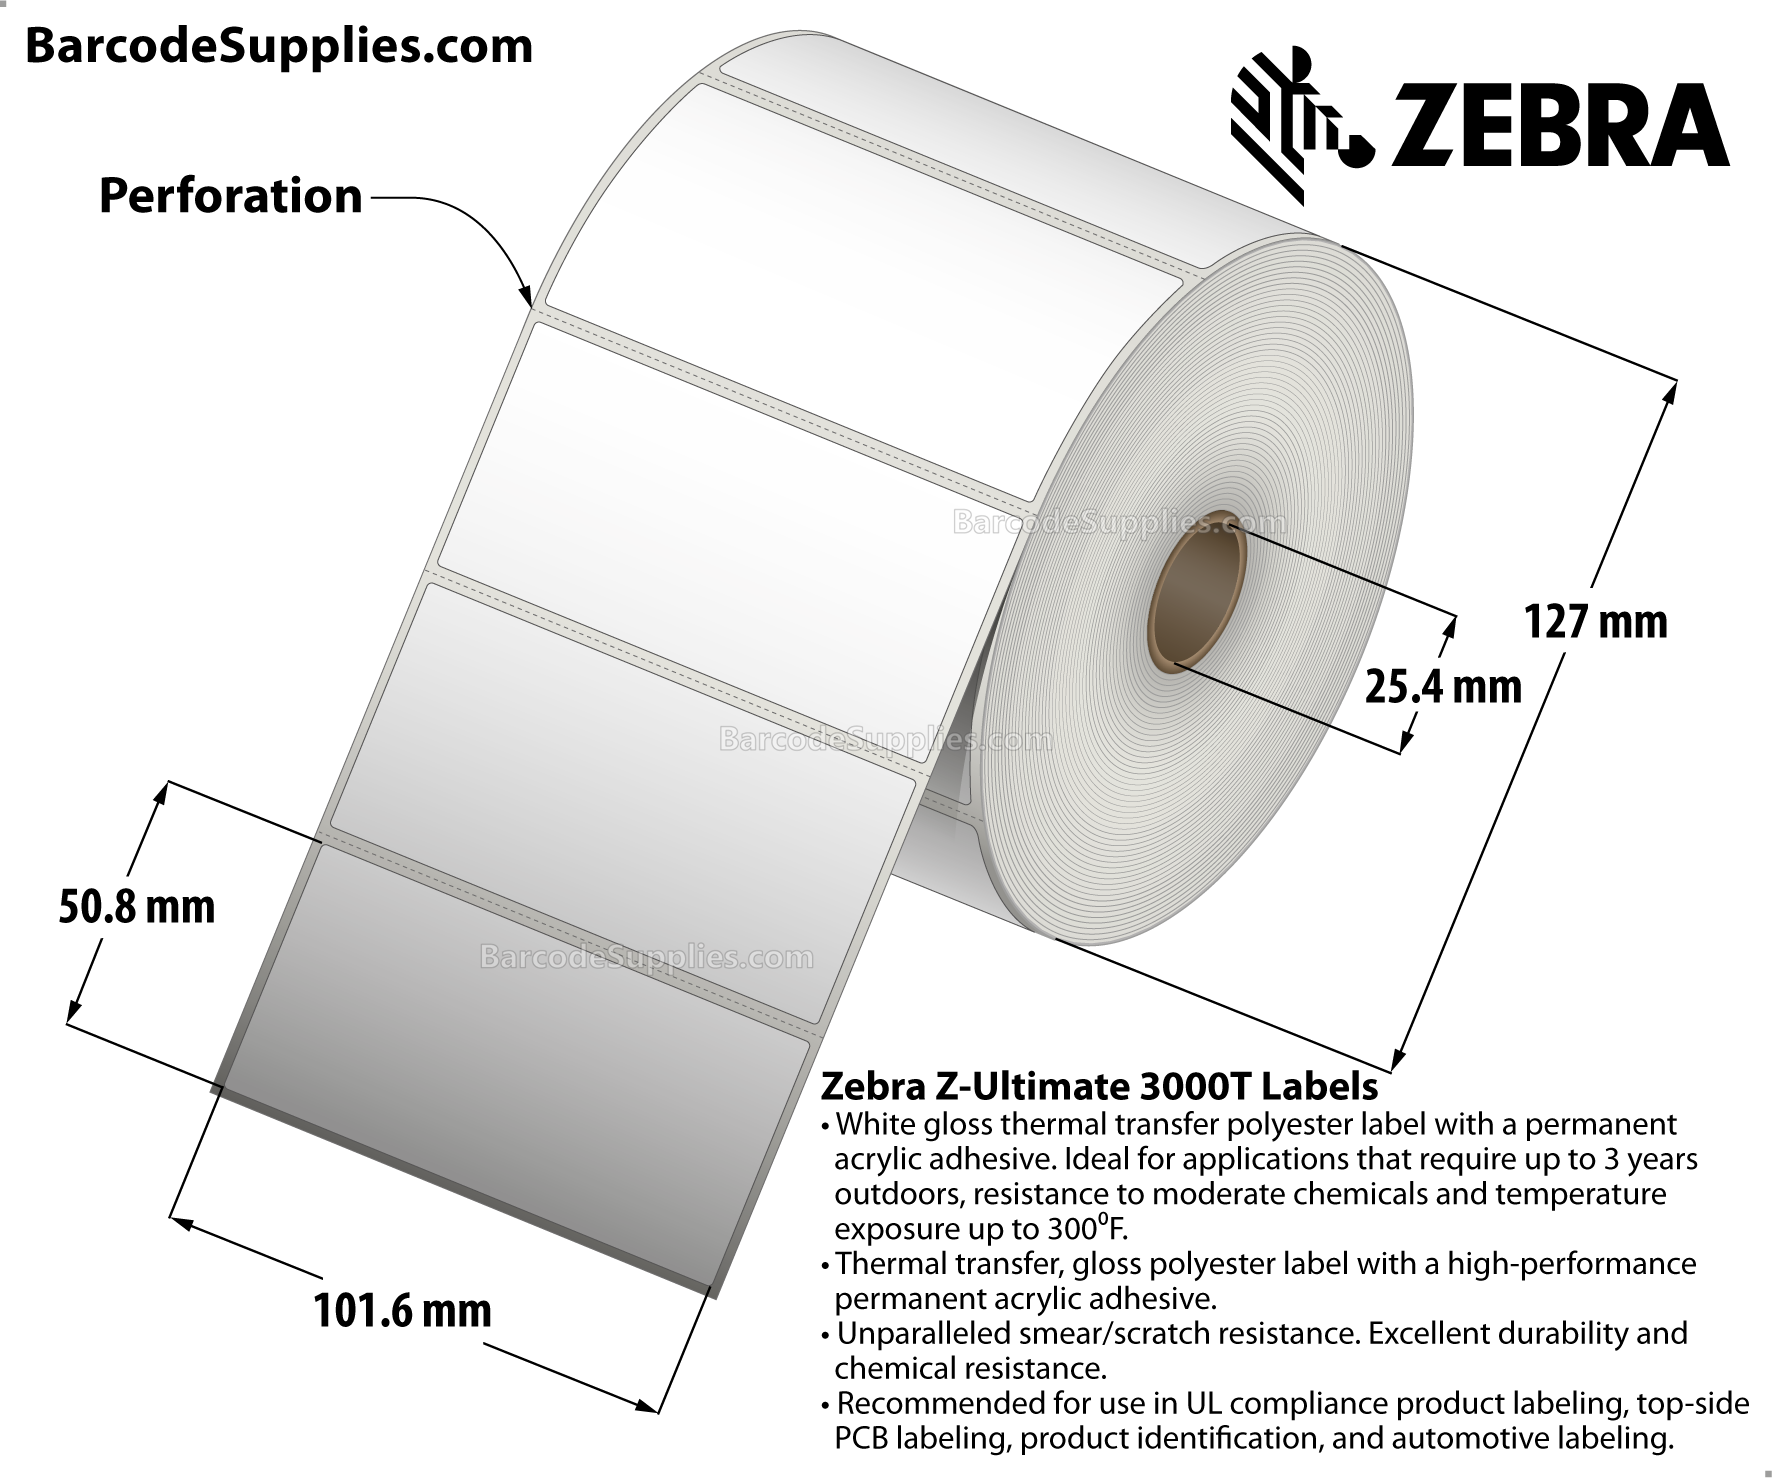 4 x 2 Thermal Transfer White Z-Ultimate 3000T Labels With Permanent Adhesive - Perforated - 1340 Labels Per Roll - Carton Of 4 Rolls - 5360 Labels Total - MPN: 18950